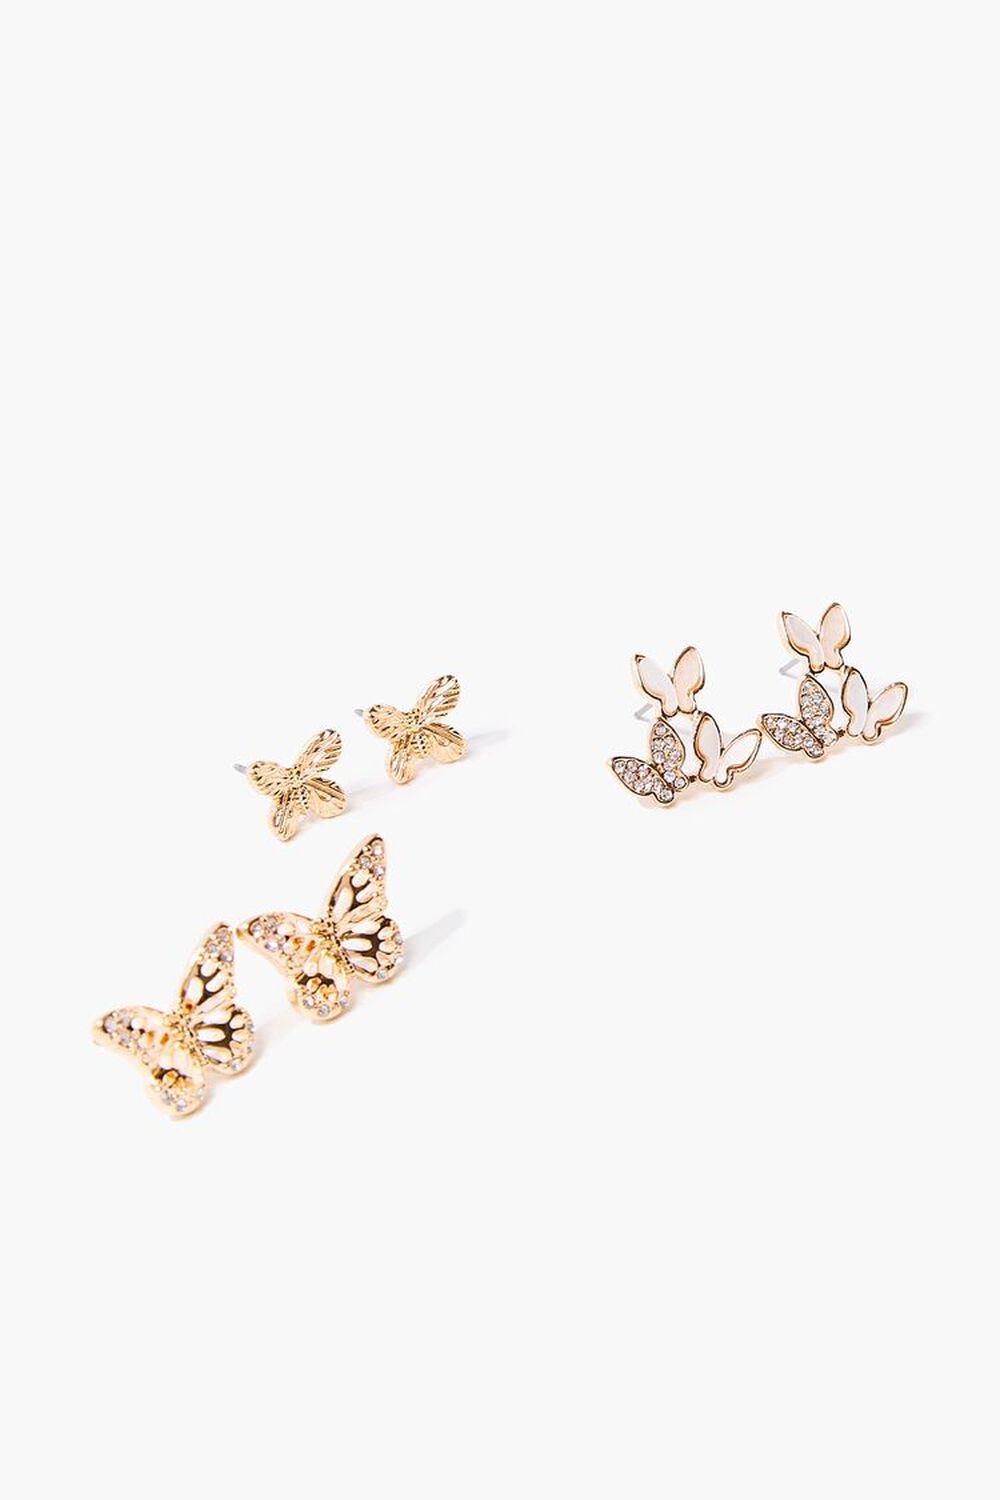 GOLD Butterfly Charm Stud Earring Set, image 1